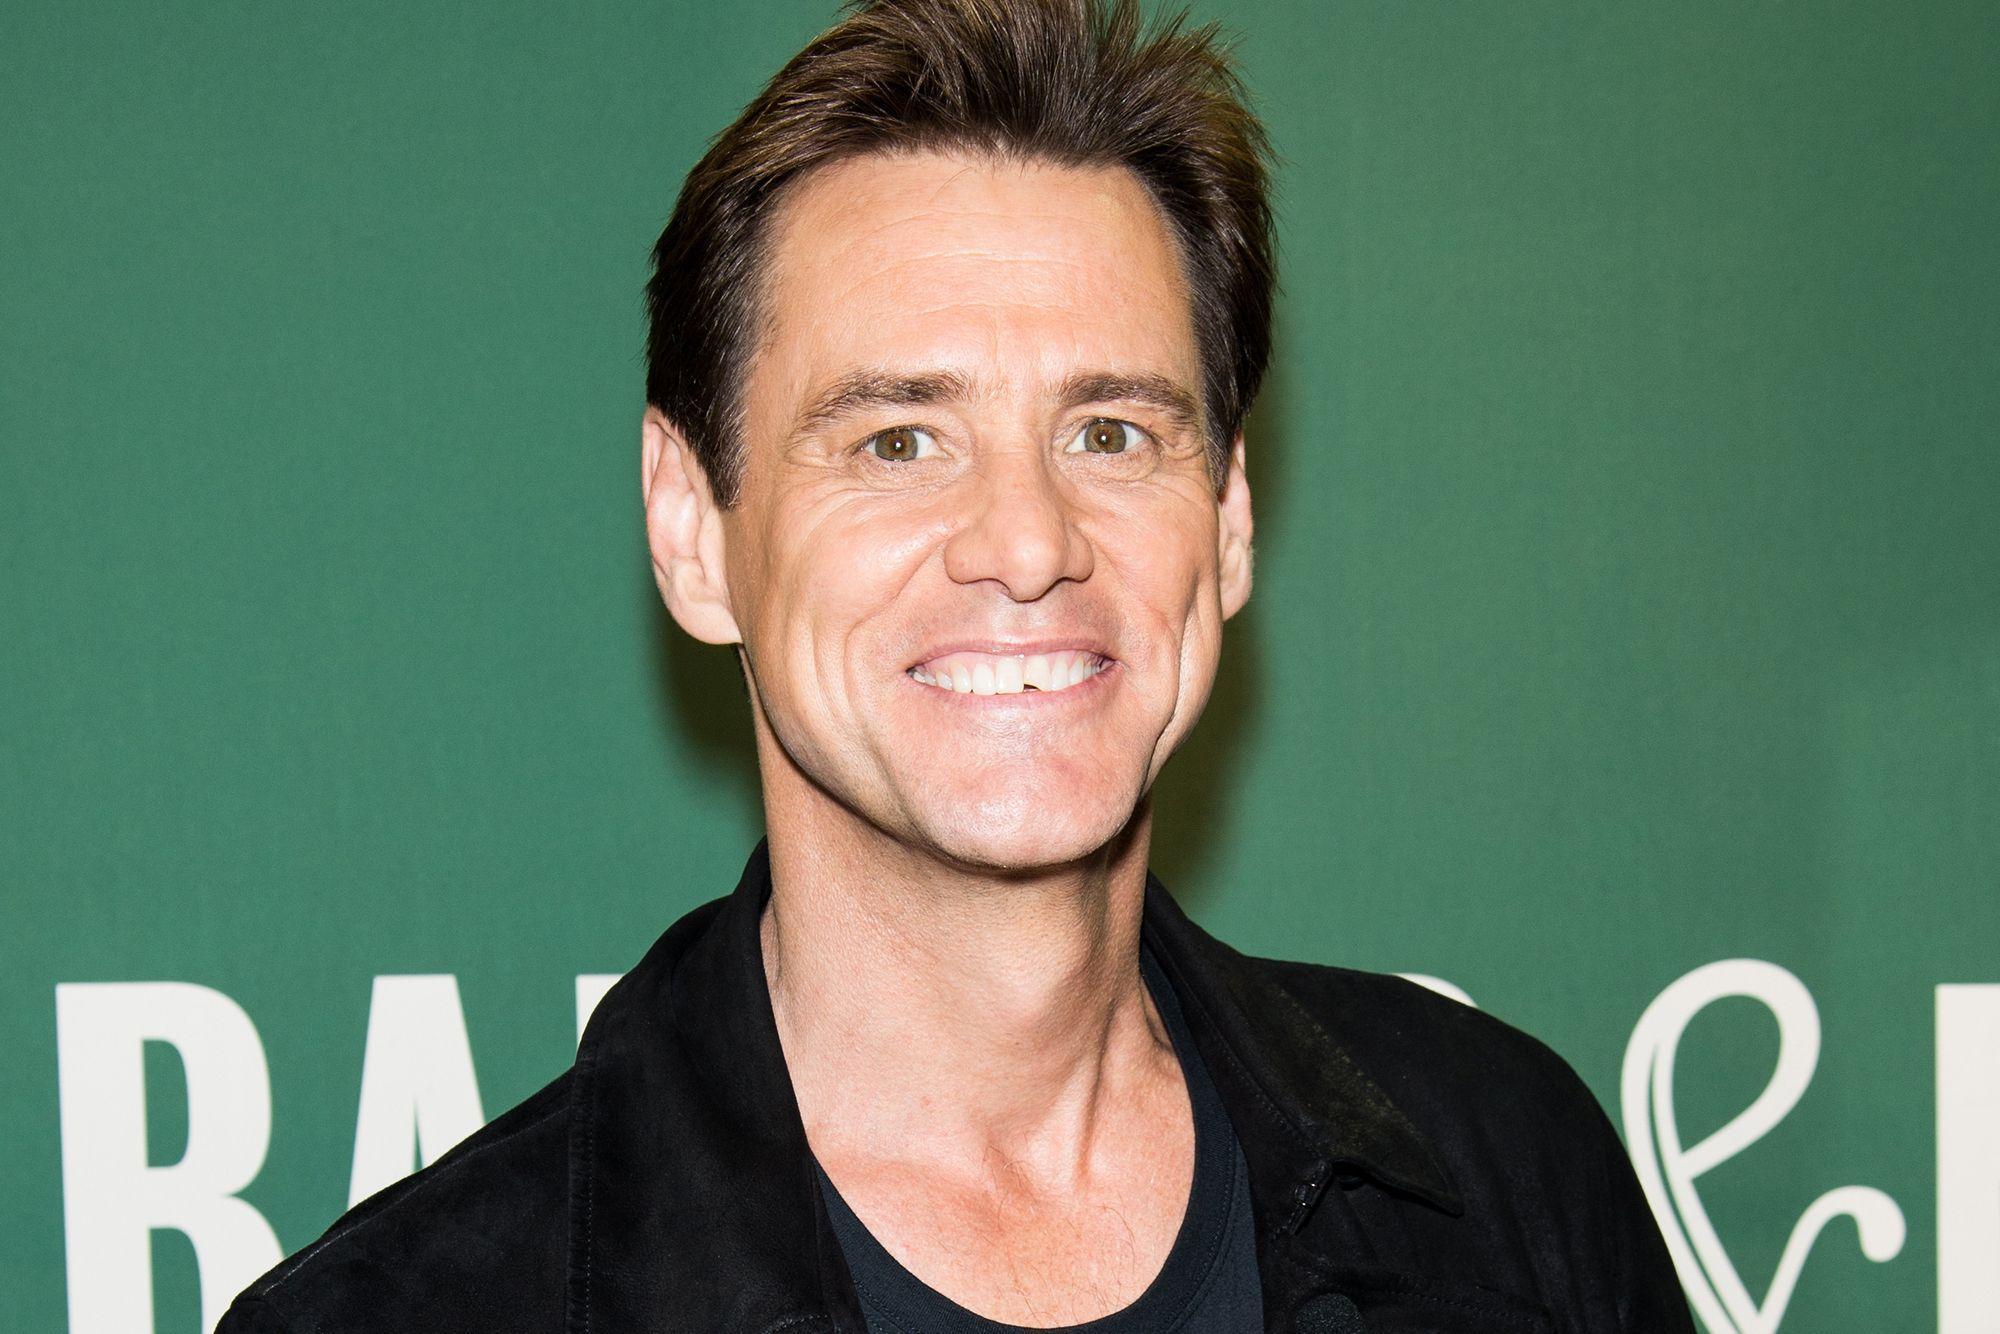 Jim Carrey Wallpapers Image Photos Pictures Backgrounds